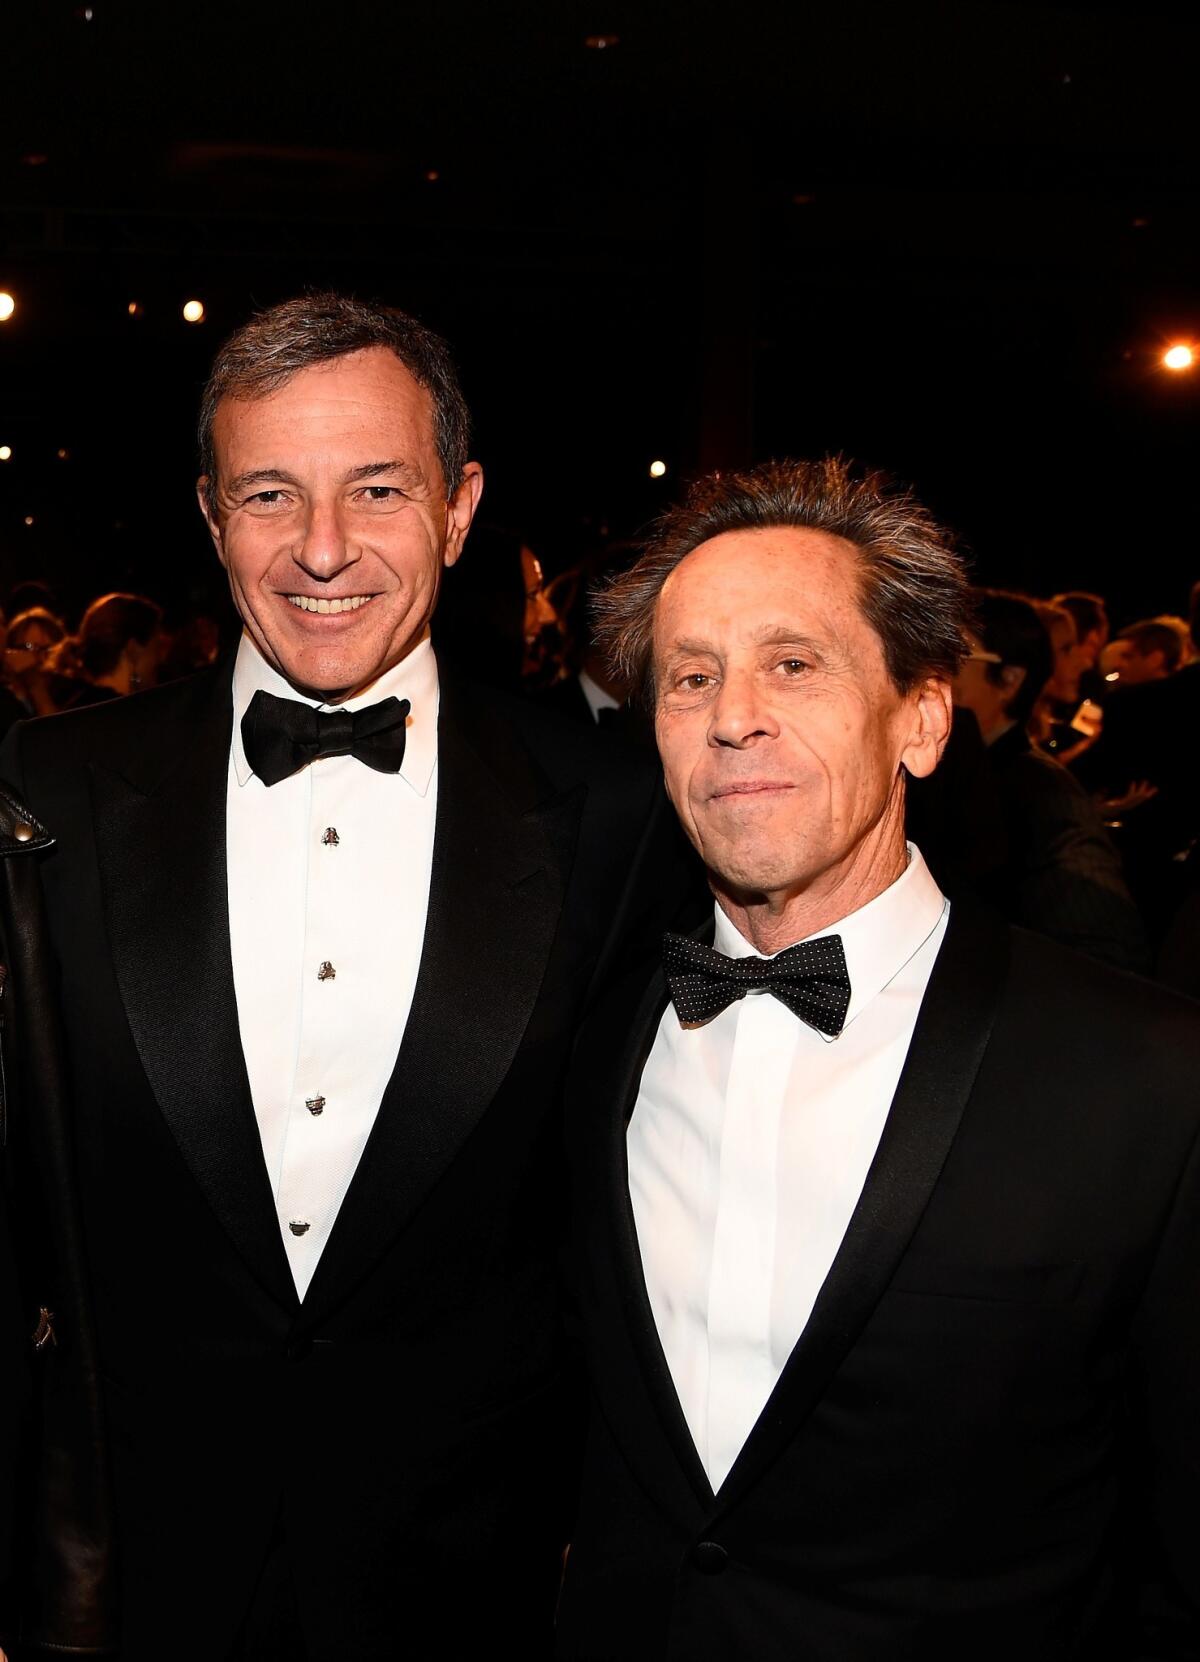 Walt Disney Co. Chairman and Chief Executive Robert Iger and producer Brian Grazer attend the 2014 LACMA Art + Film Gala.